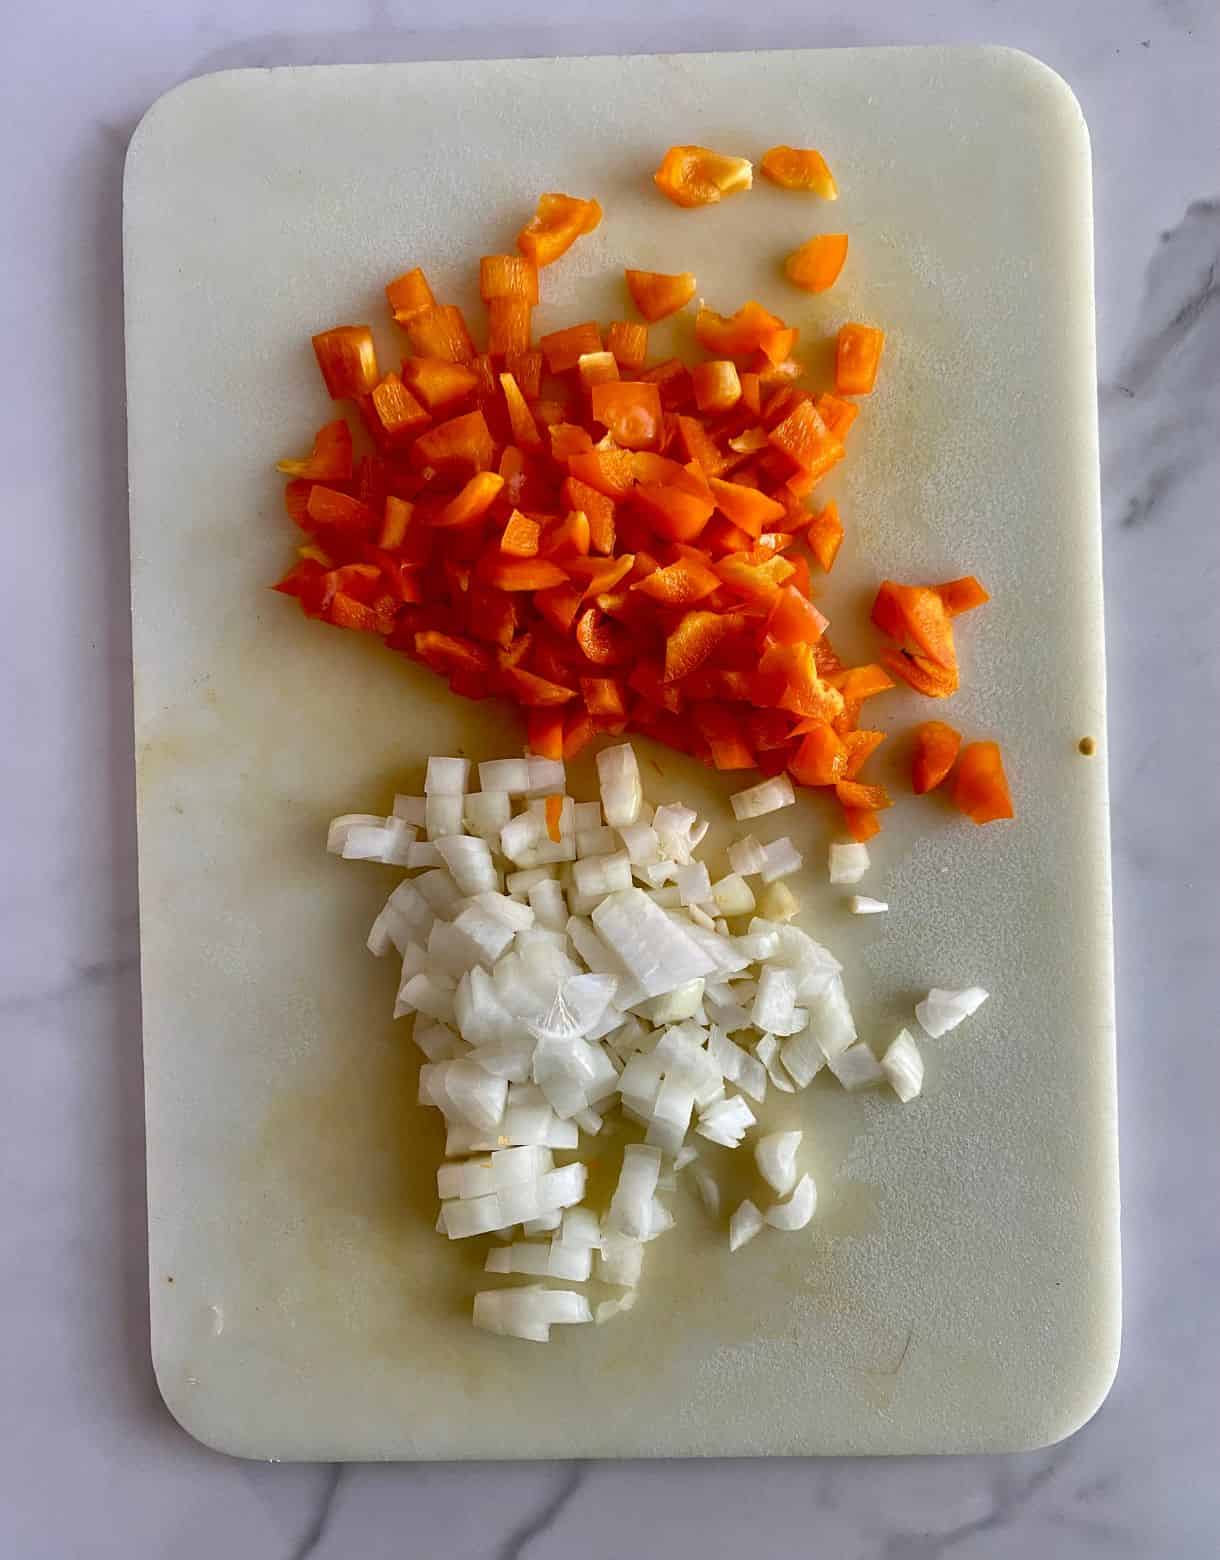 A cutting board with diced onion and bell pepper.